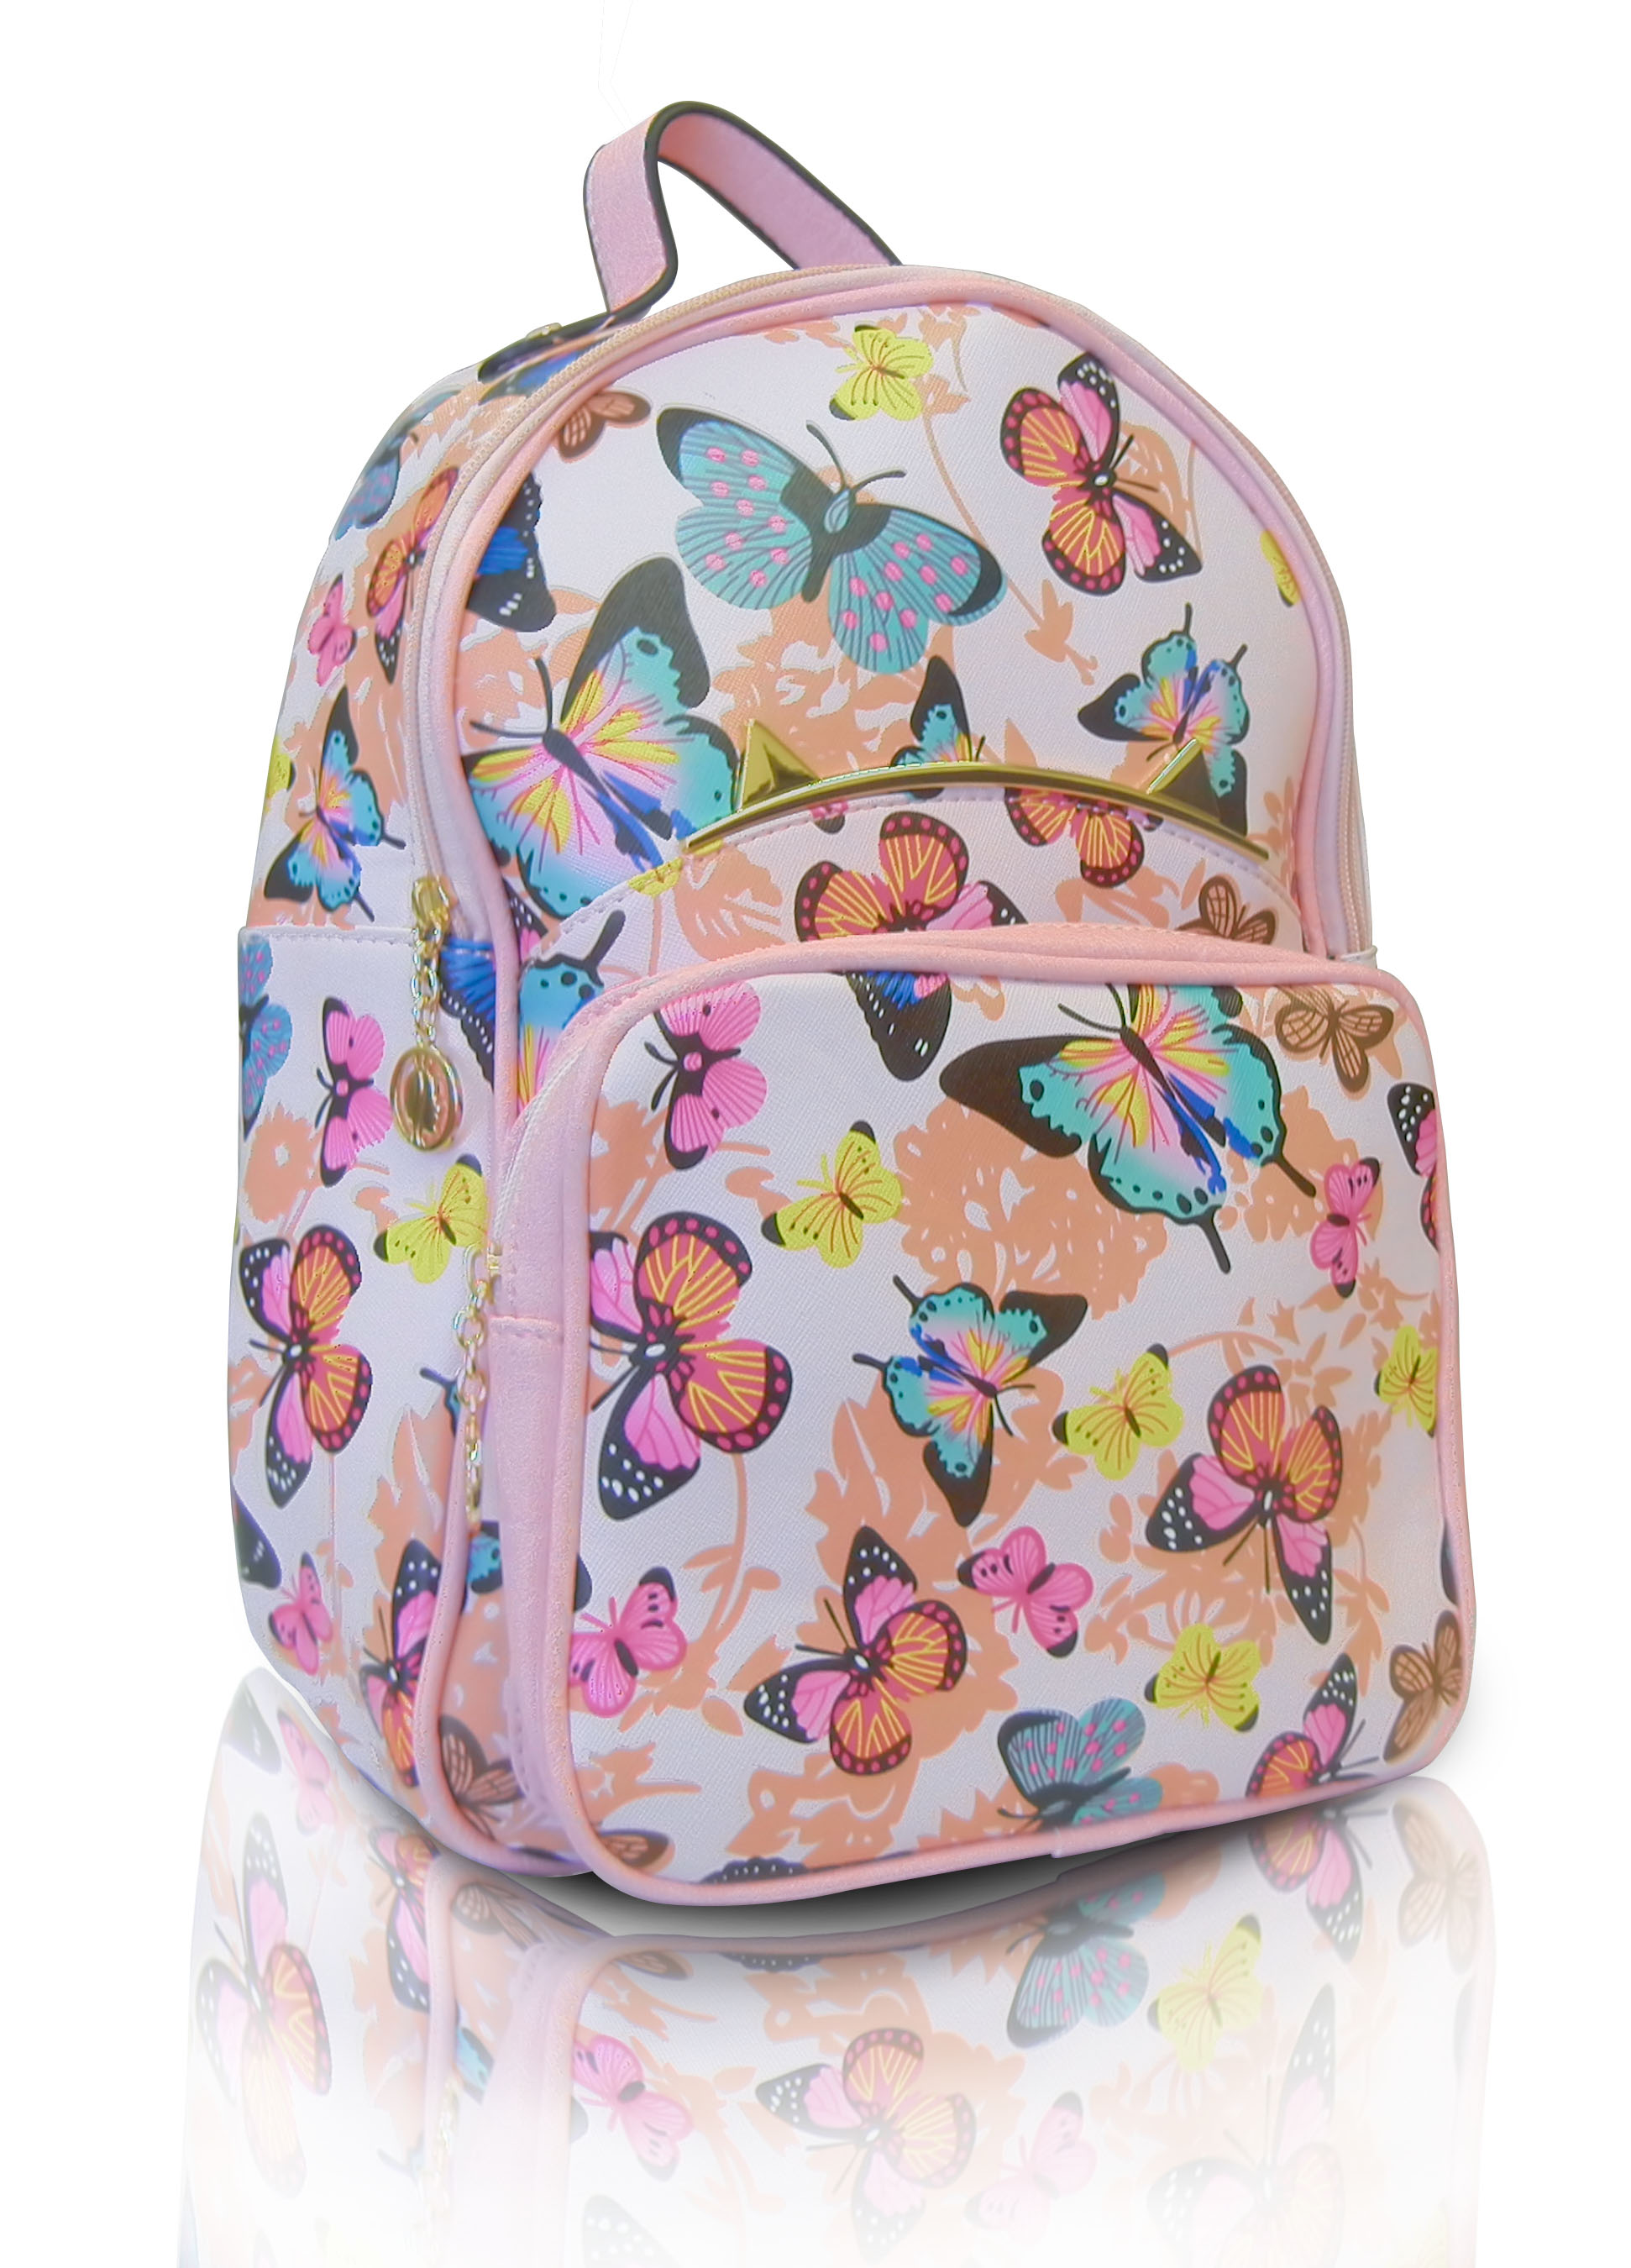 backpack for girls, pink, butterflies, bright, colorful,